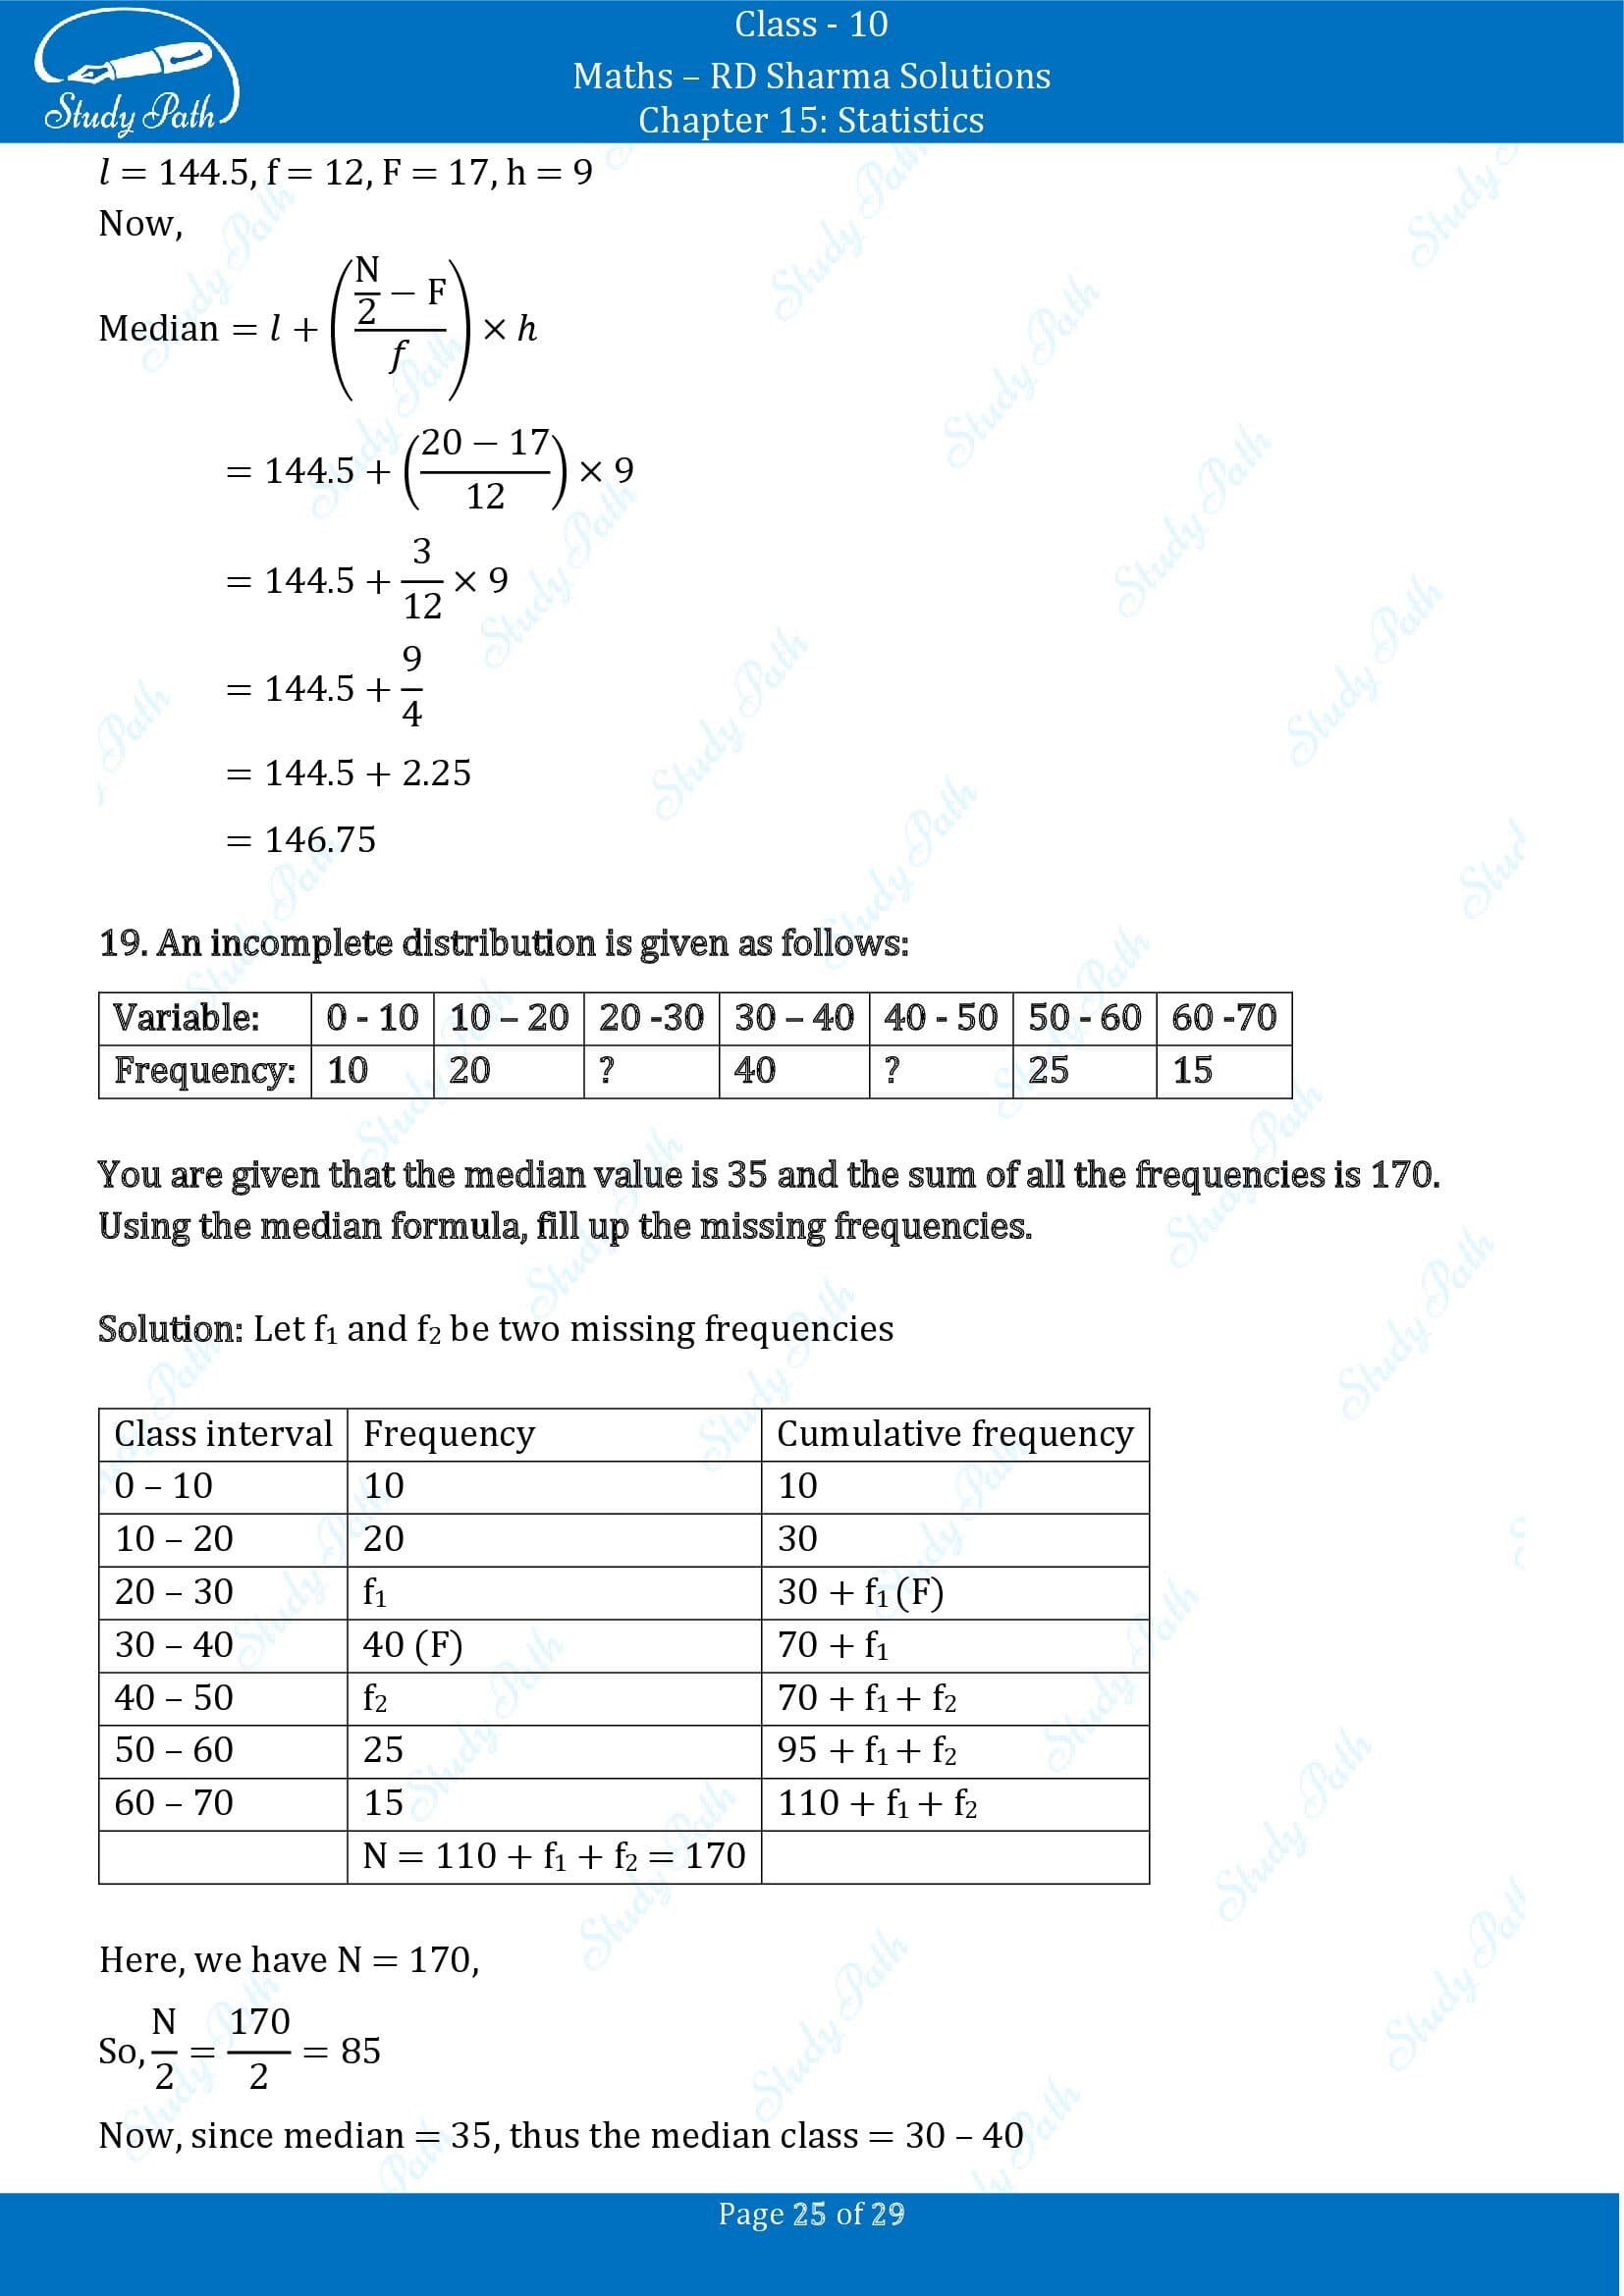 RD Sharma Solutions Class 10 Chapter 15 Statistics Exercise 15.4 00025